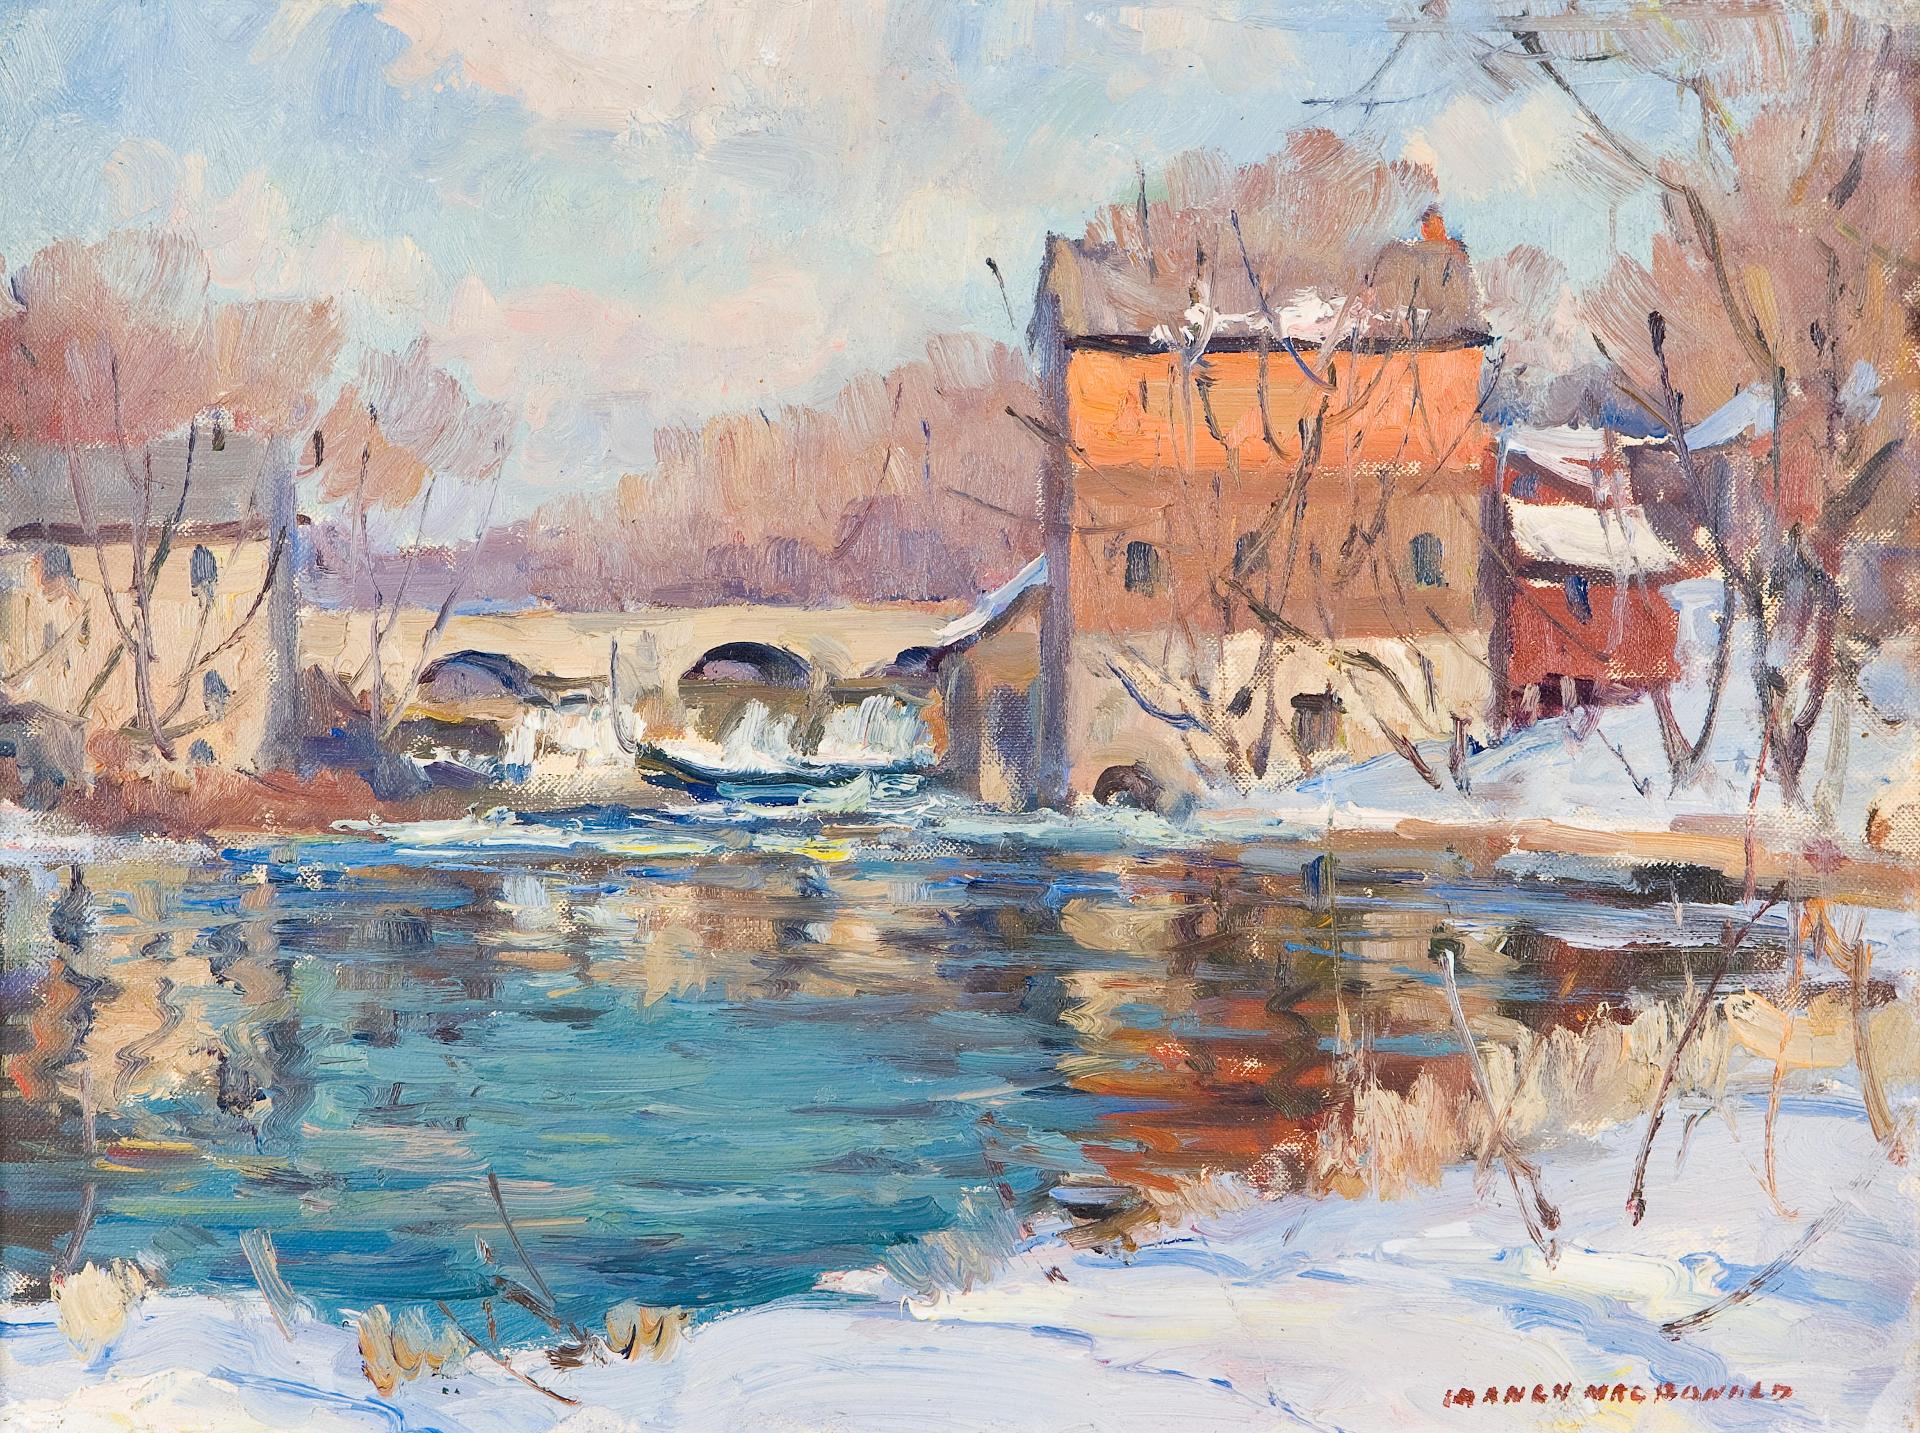 Manly Edward MacDonald (1889-1971) - Mill by the river in winter; Mill by the river